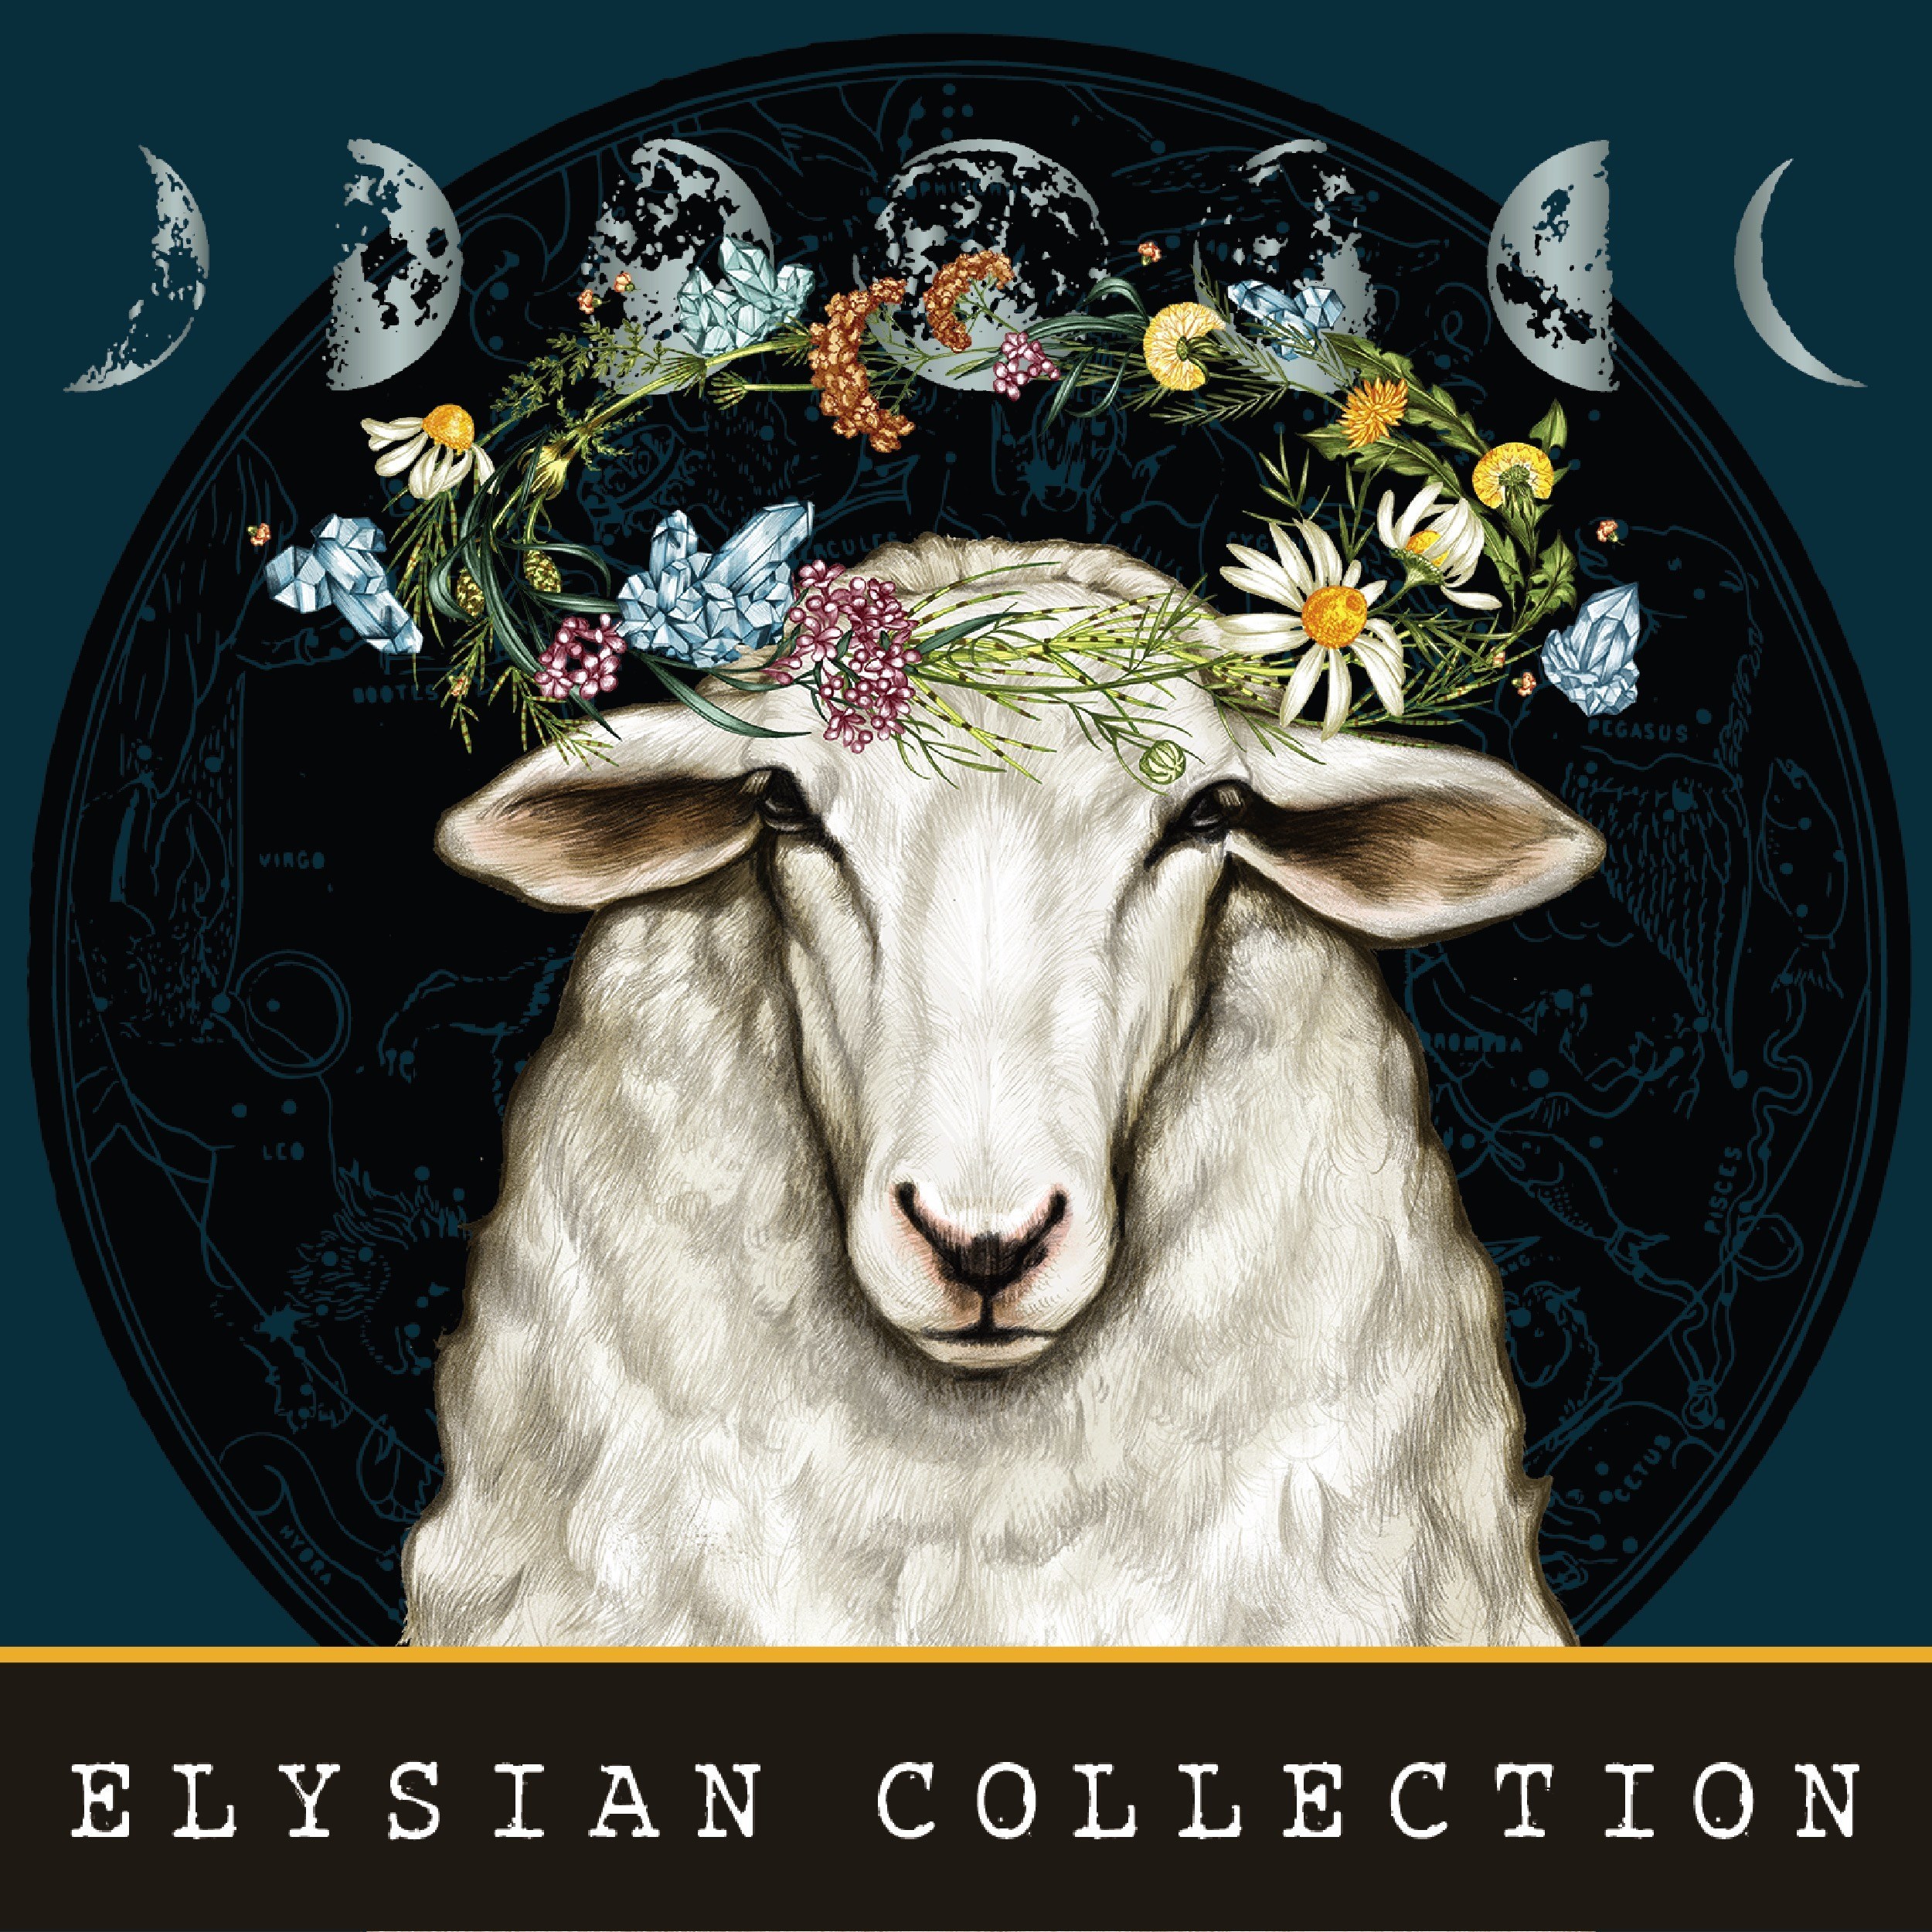 Bonterra Organic Vineyards Launches New Brand: The Elysian Collection